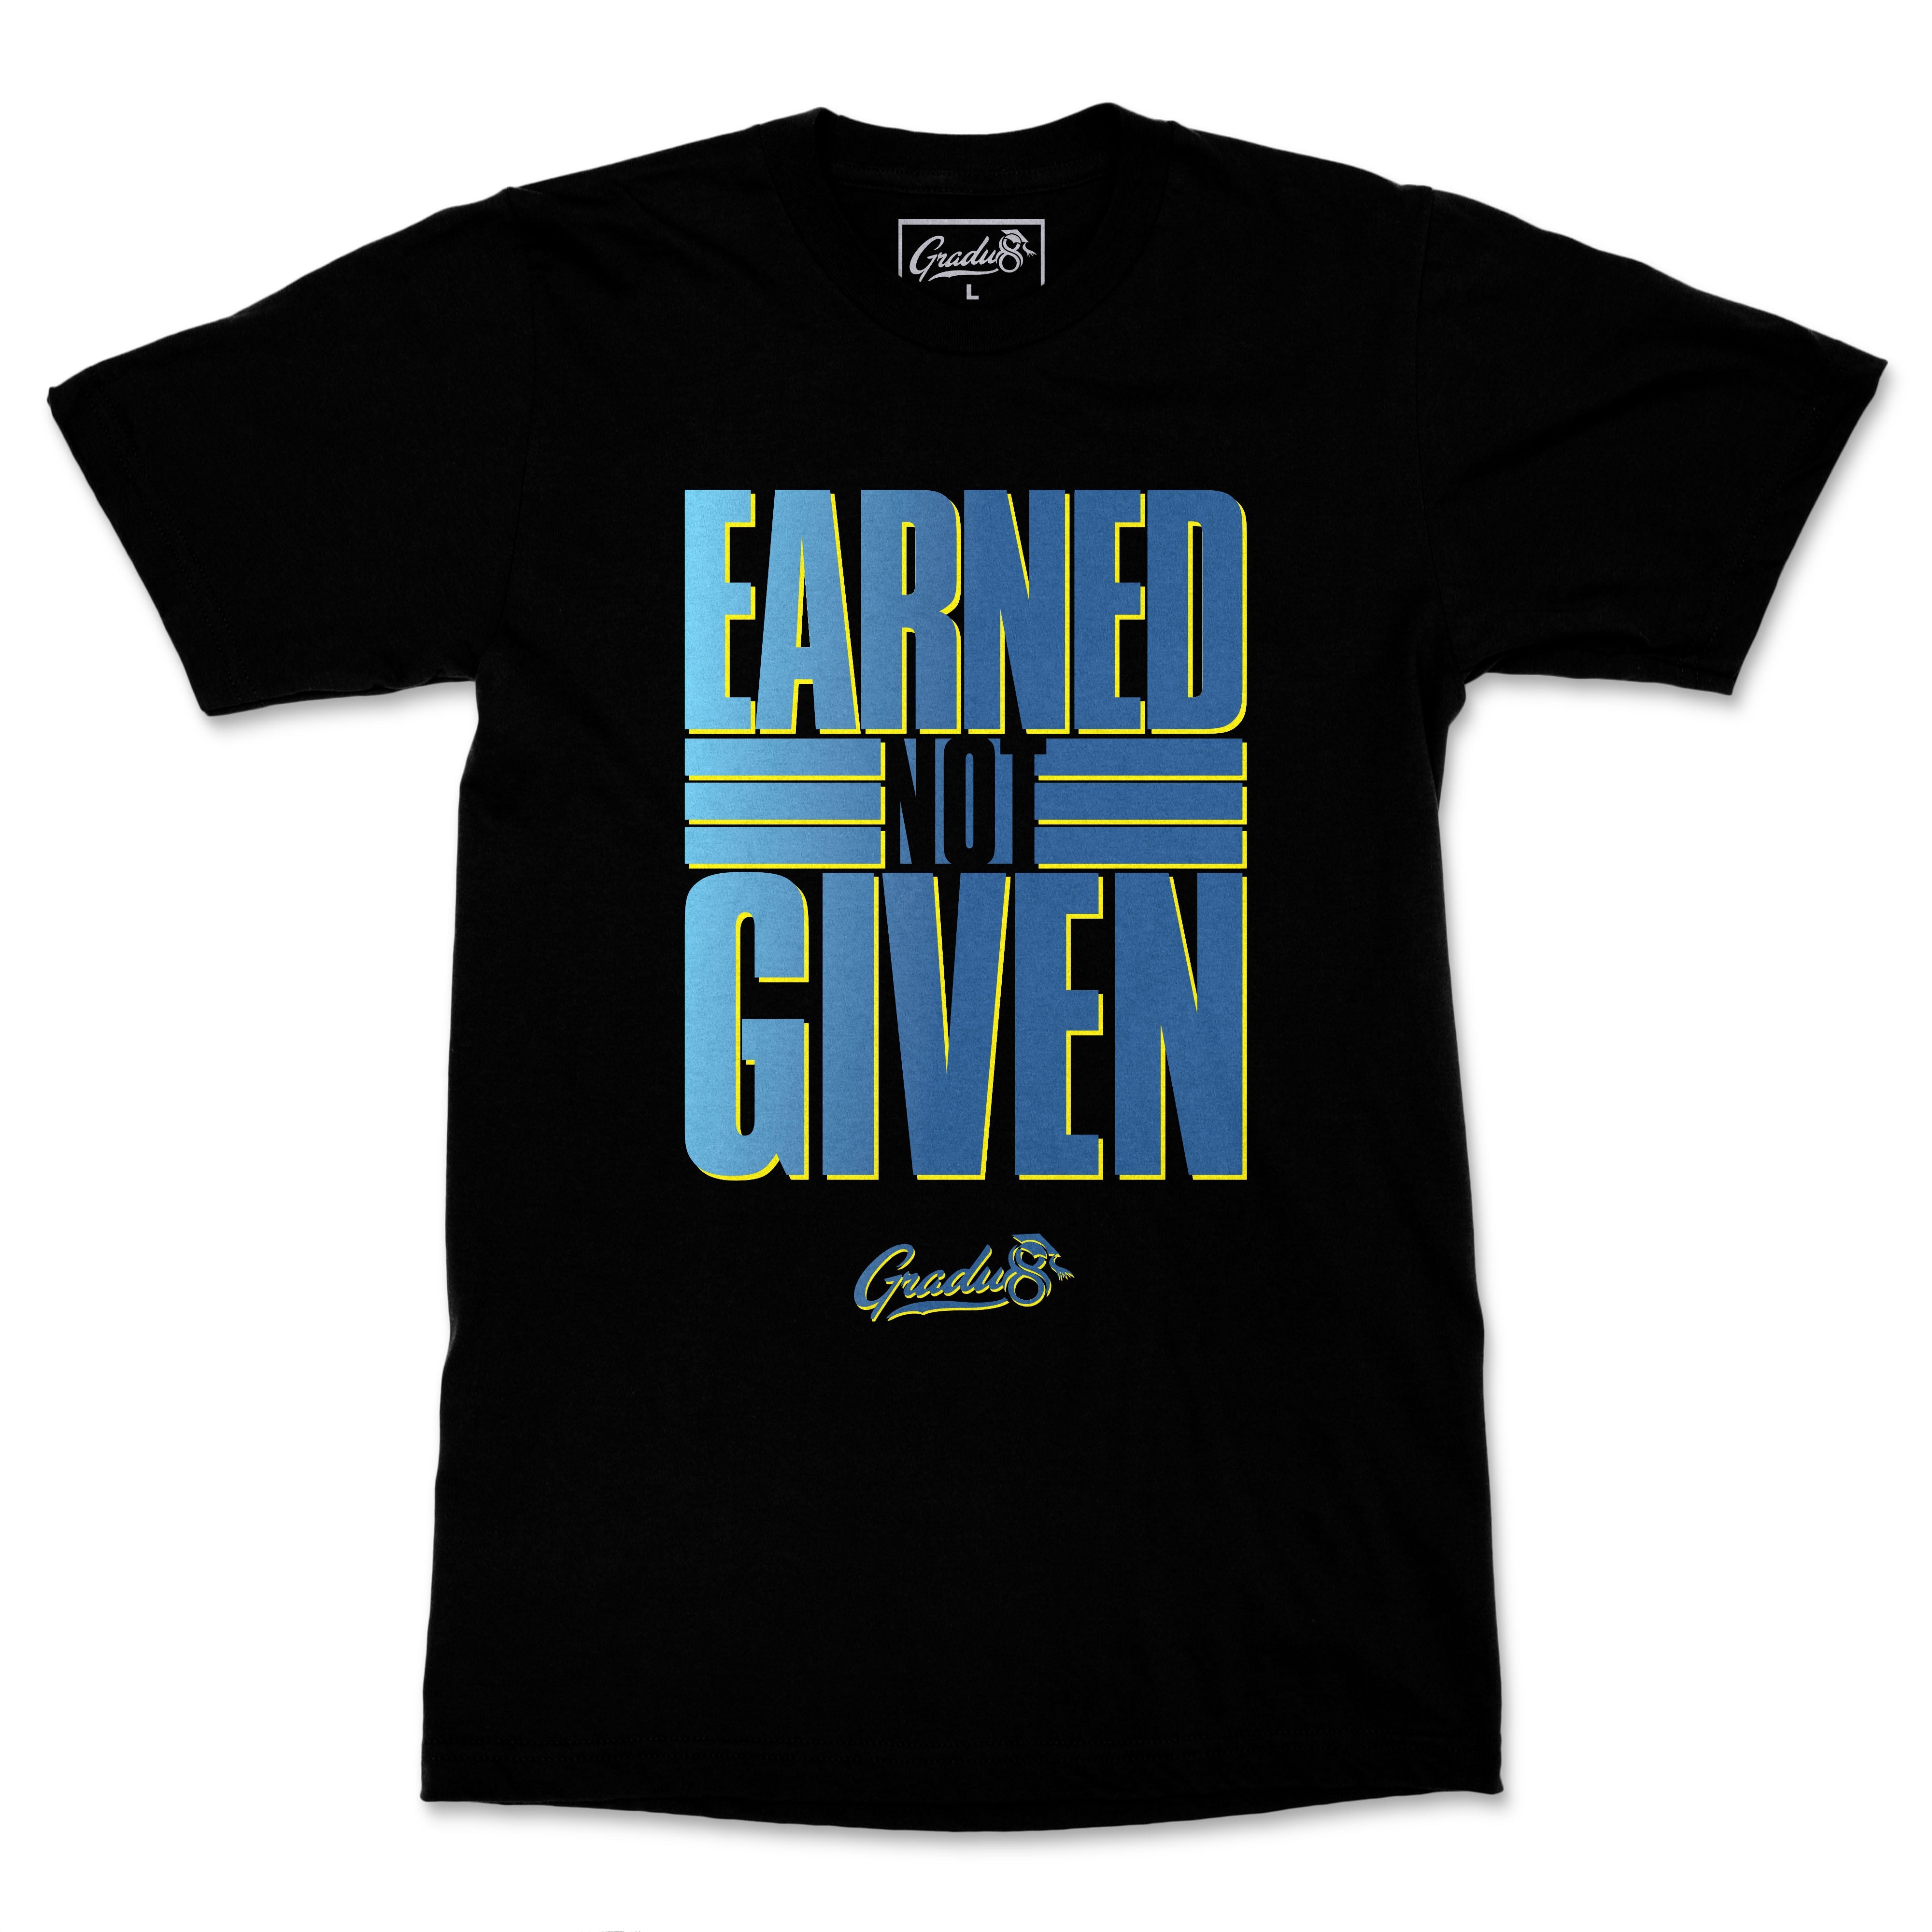 Earned Not Given Premium T-shirt - Black